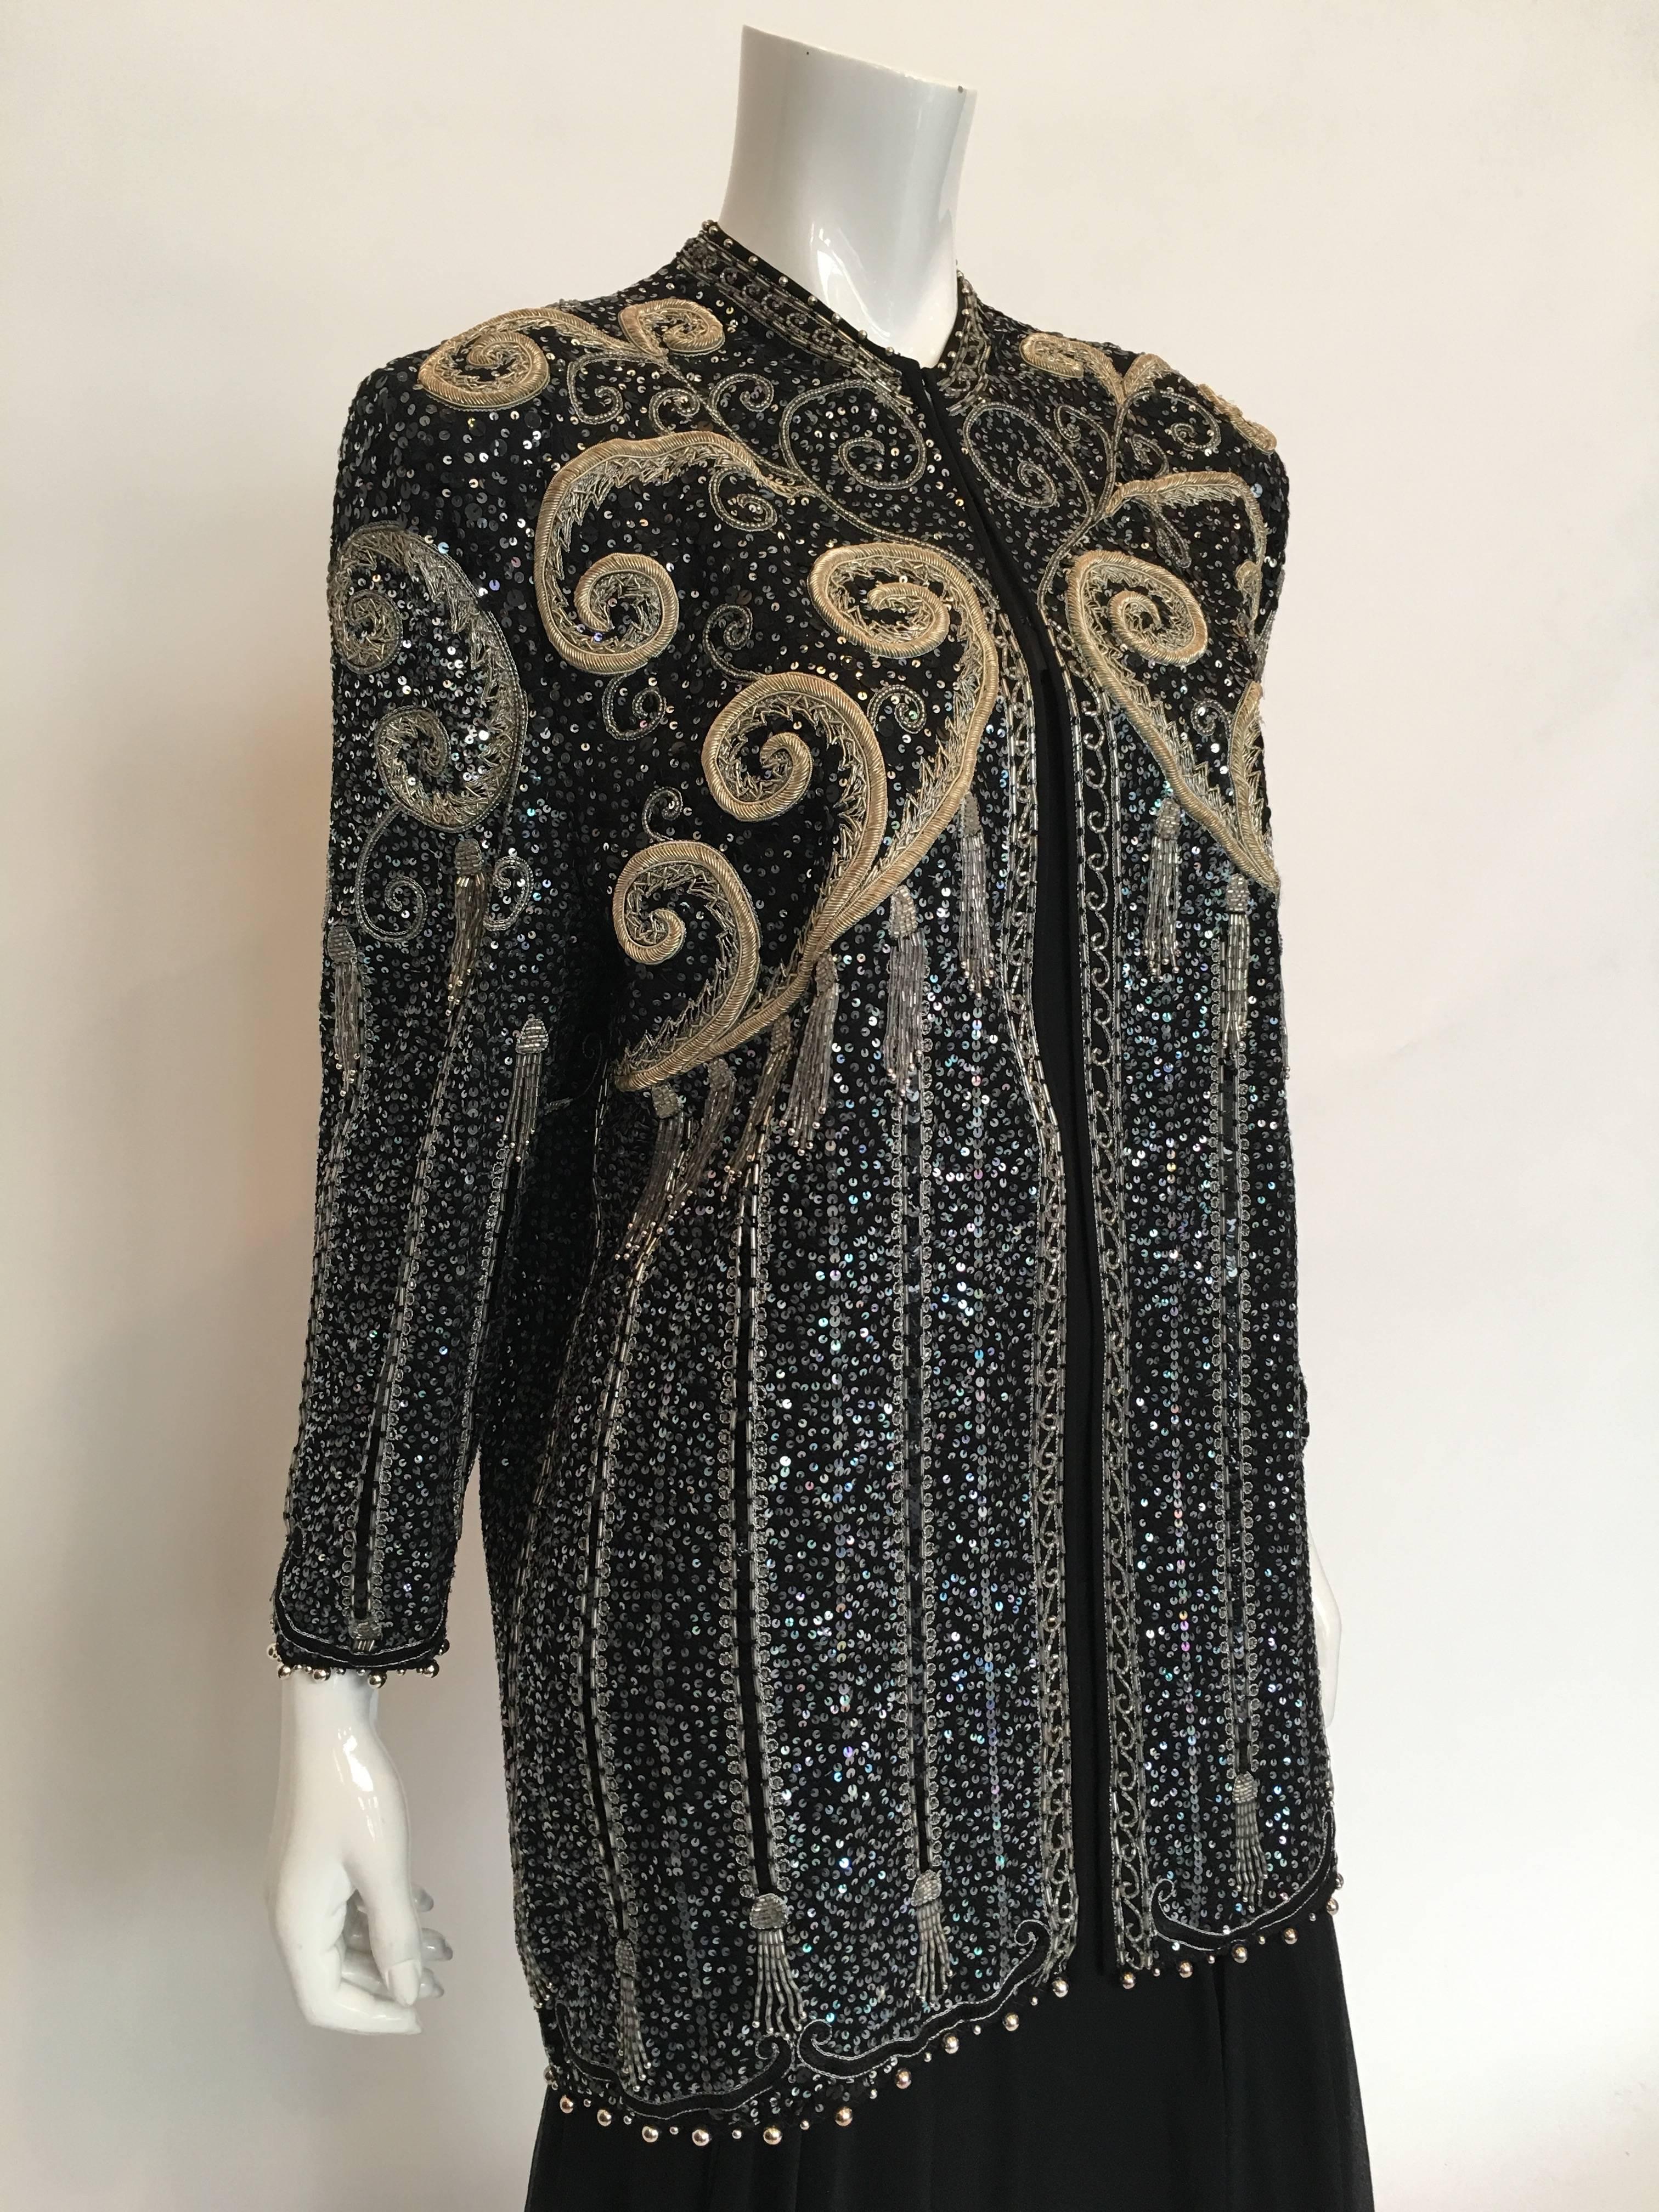 Zandra Rhodes 1980's Beaded and Sequined Jacket

*ALL MEASUREMENTS TAKEN FLAT*

Beaded Jacket:
Shoulder to shoulder - 17 inches
Sleeve (shoulder seam to wrist) - 21 inches
Armpit to armpit - 20 inches 
Bust - 40 inches
Total Length - 32 inches